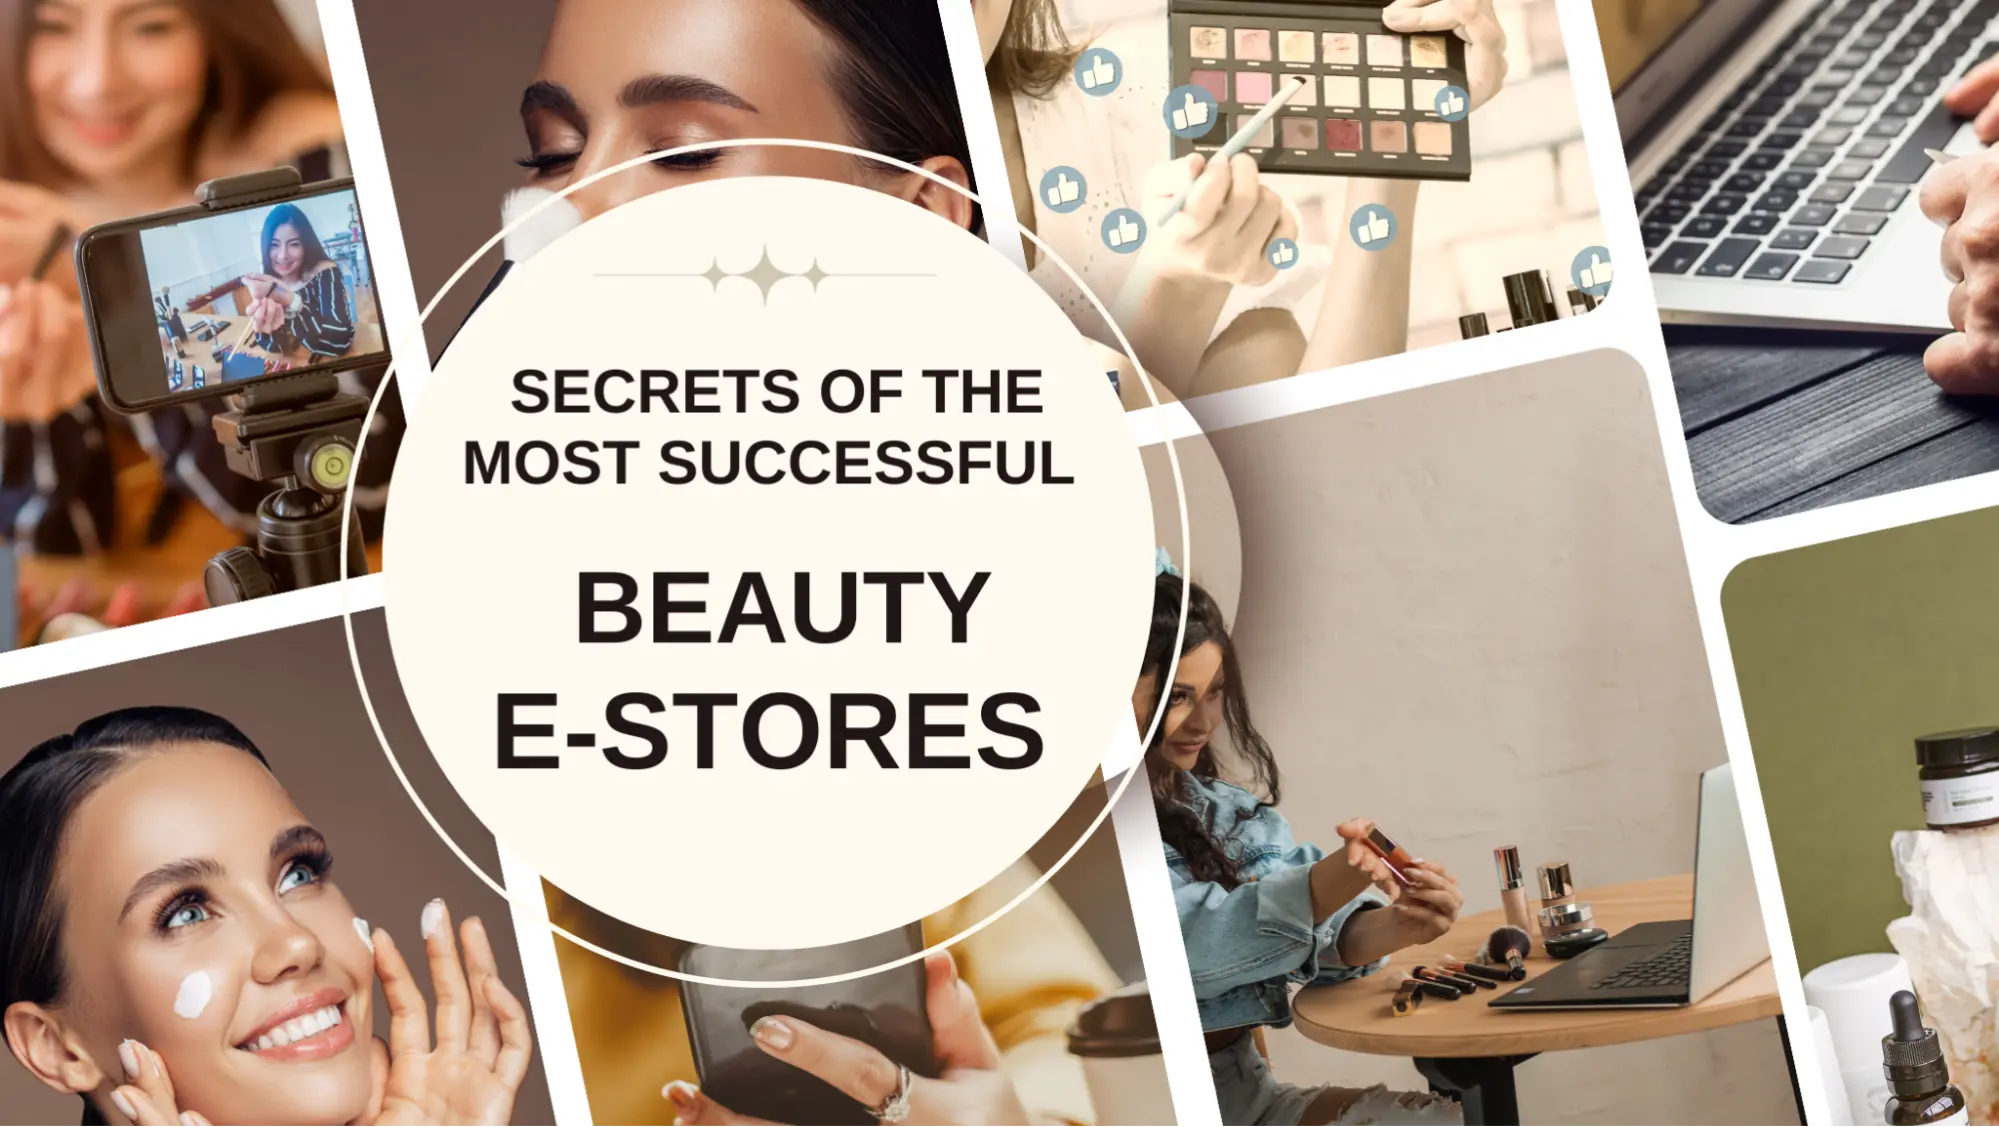 15+ Marketing Secrets Behind the Most Successful Beauty E-Store Products